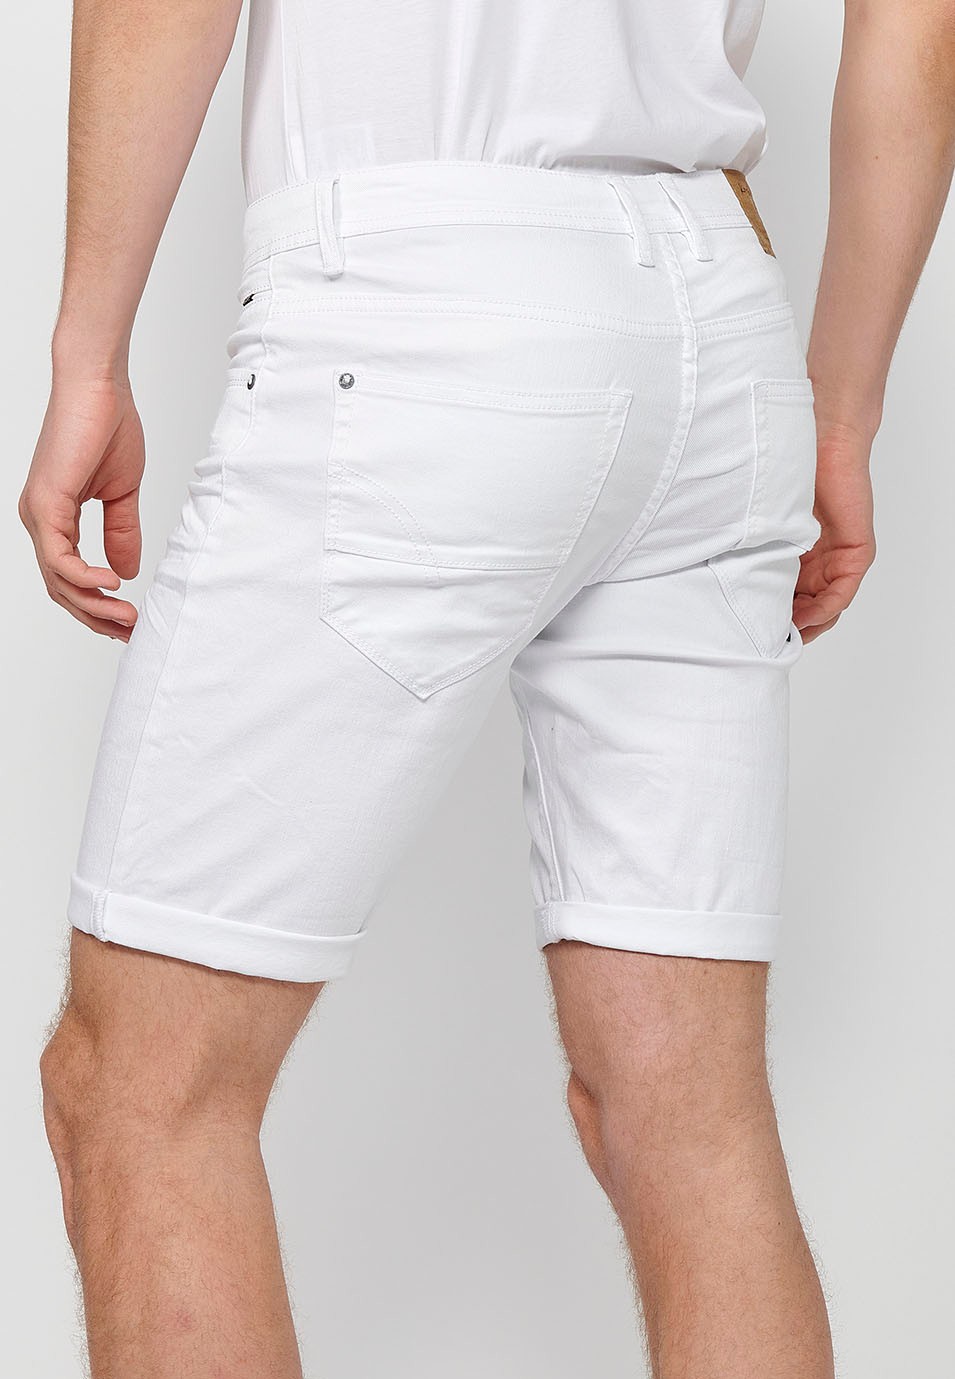 Denim Bermuda shorts with cuffed finish and front zipper and button closure. Five pockets, one match pocket, White for Men 5